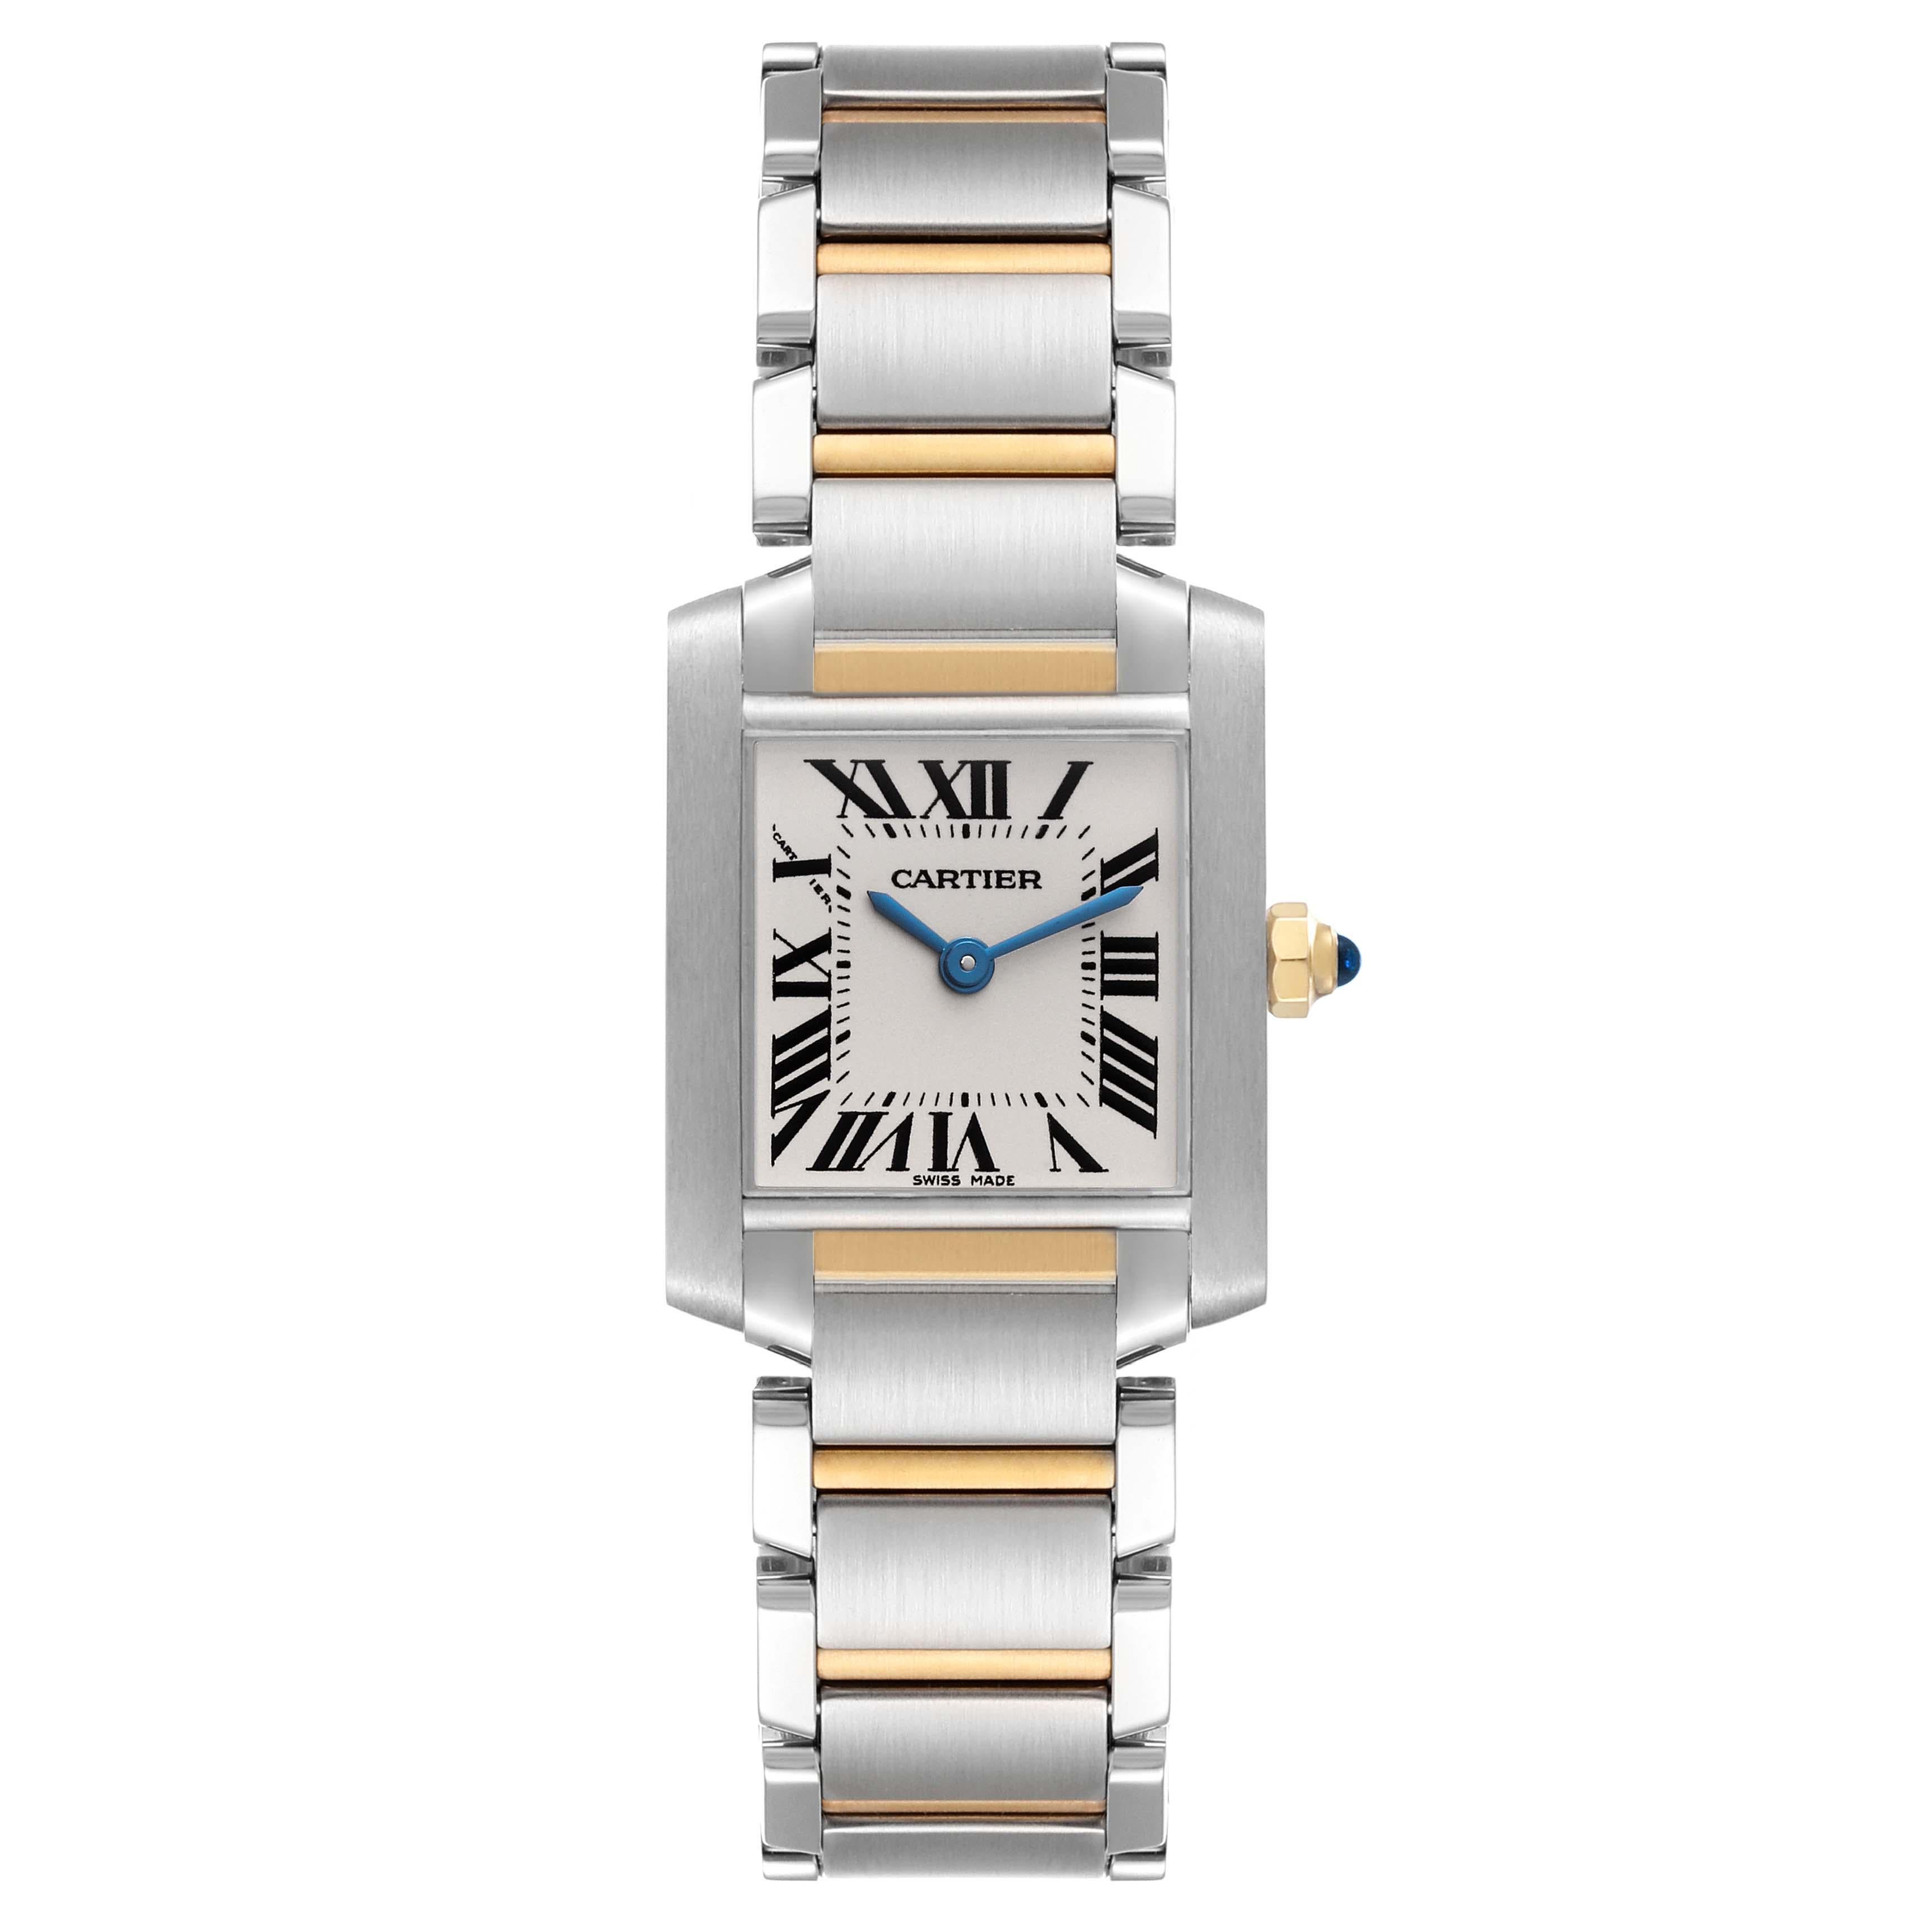 Cartier Tank Francaise Small Steel Yellow Gold Ladies Watch W51007Q4 Box Papers. Quartz movement. Rectangular stainless steel 25.0 x 20.0 mm case. Octagonal 18k yellow gold crown set with a blue spinel cabochon. . Scratch resistant sapphire crystal.